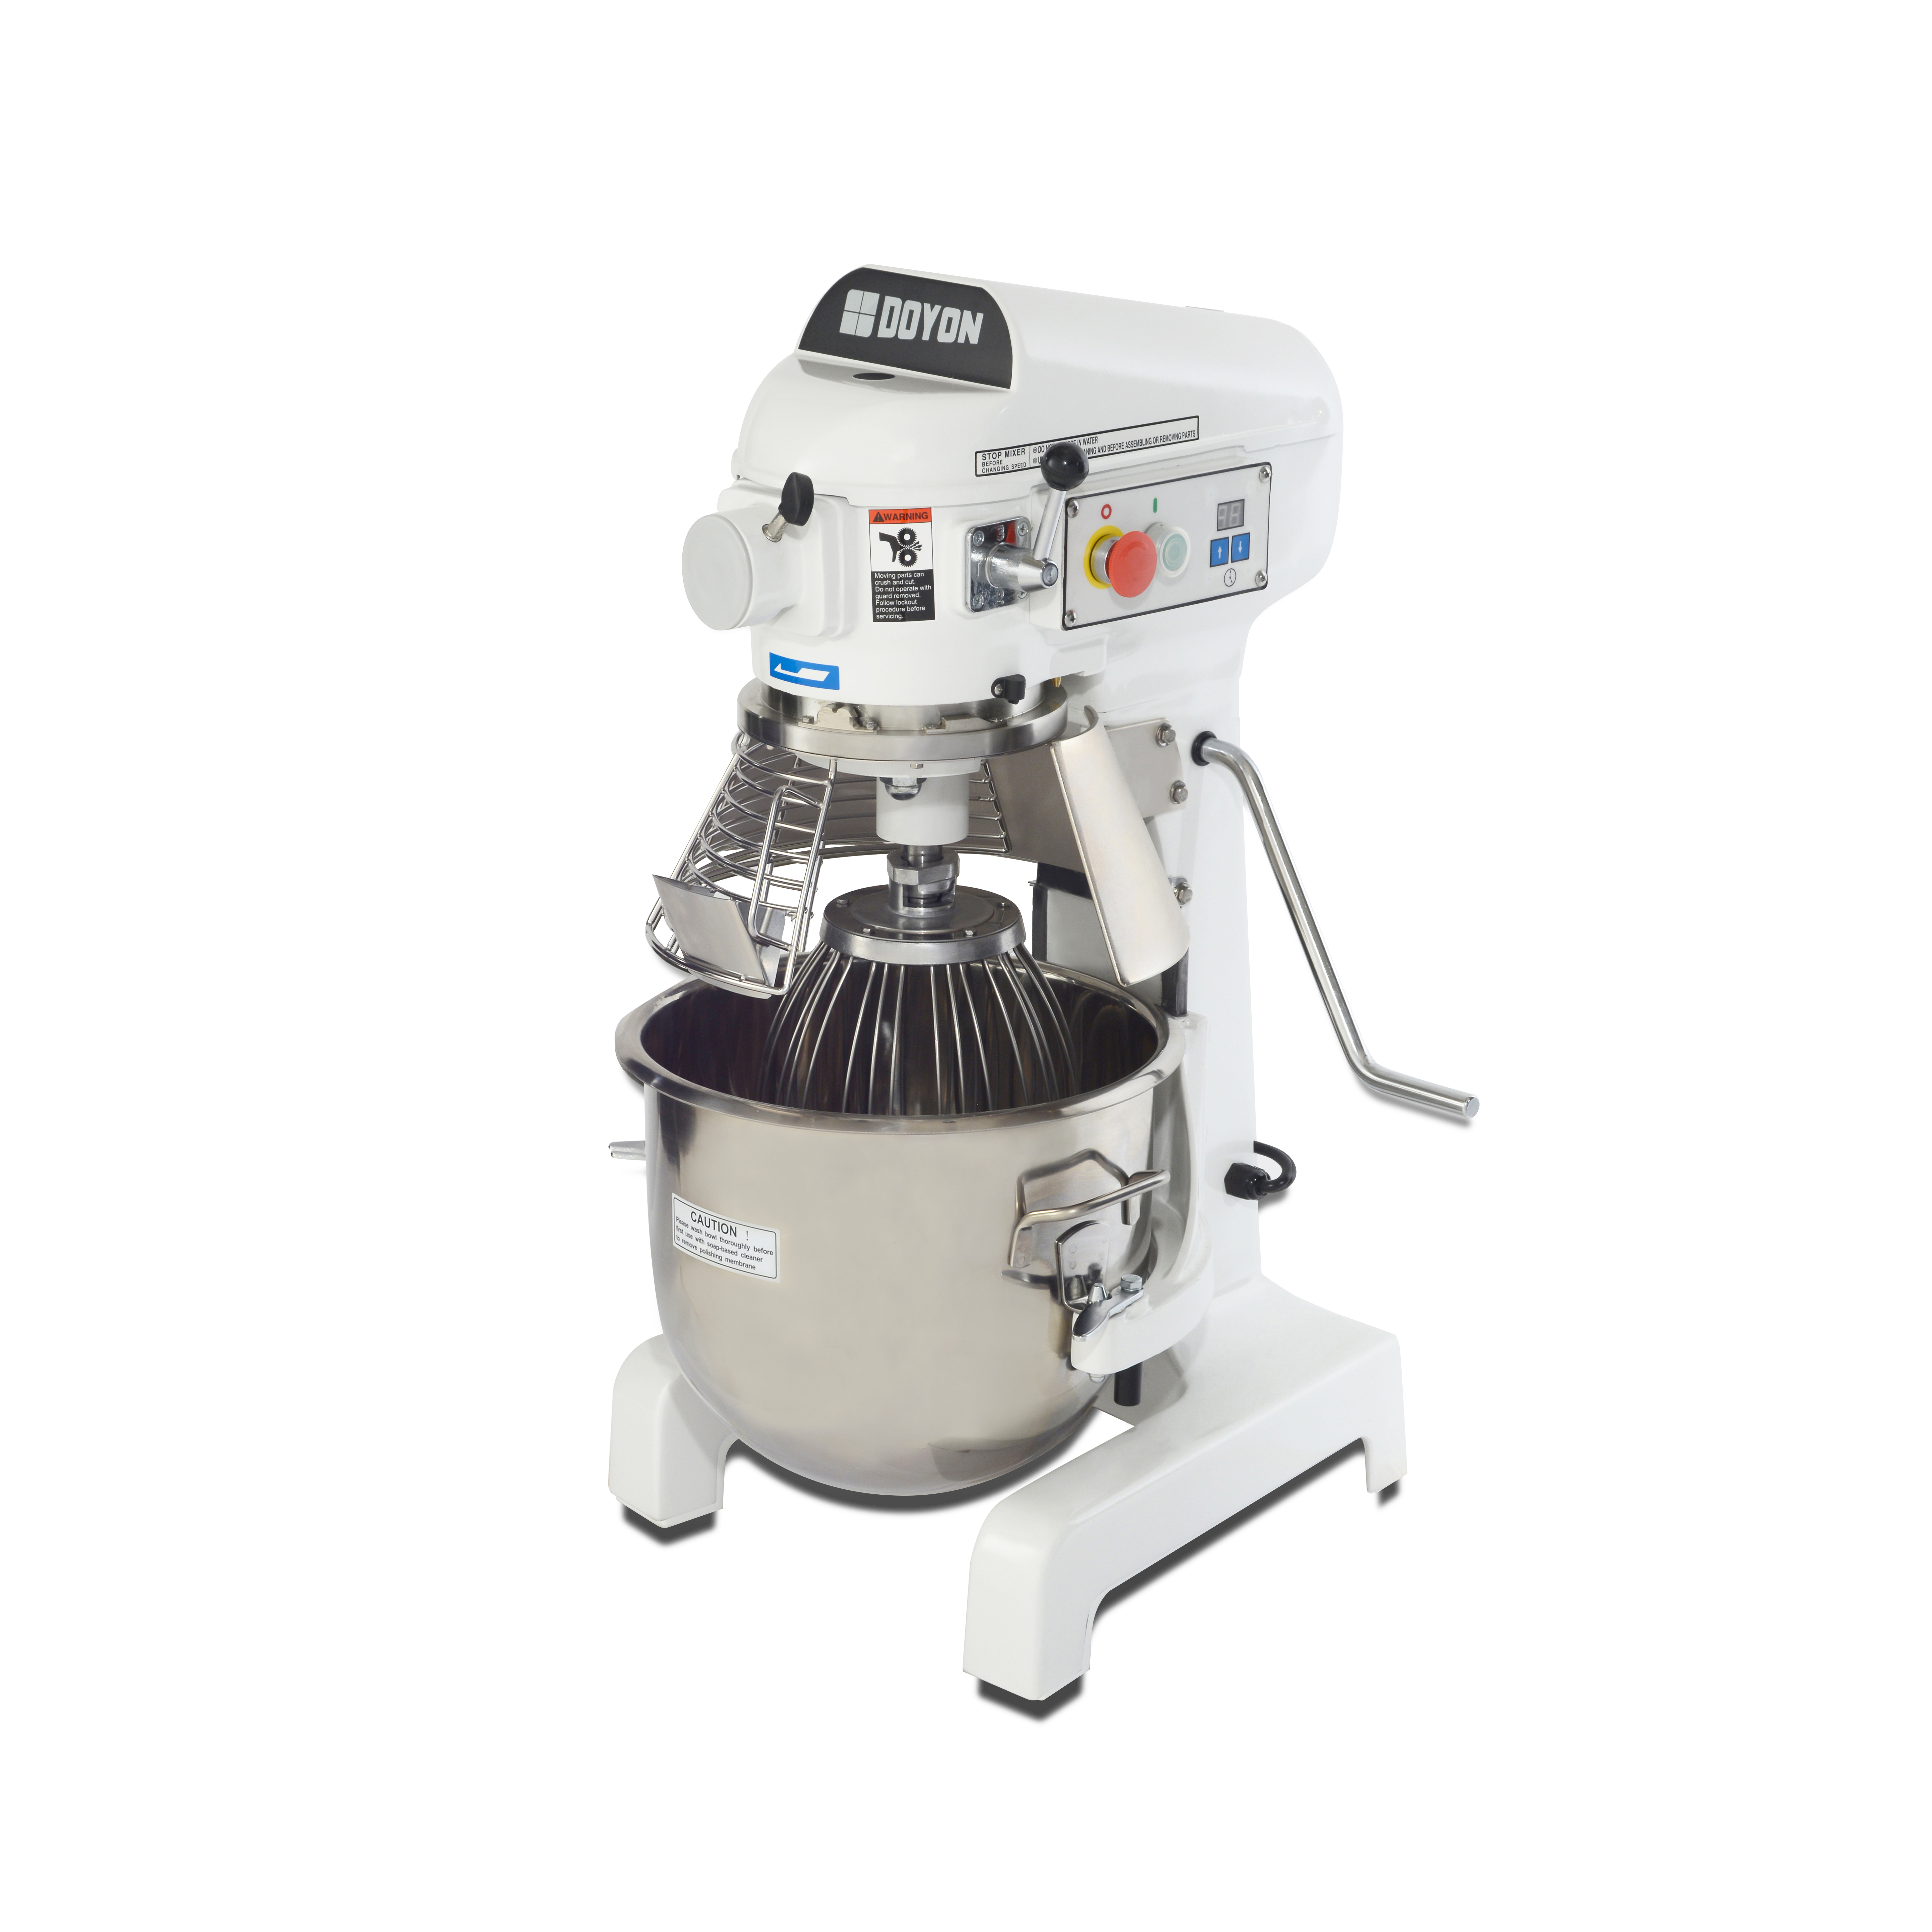 Doyon SM200 Floor Model 20-Qt Planetary Mixer with Timer, #12 Hub, 3-Speed, 1/2 Hp